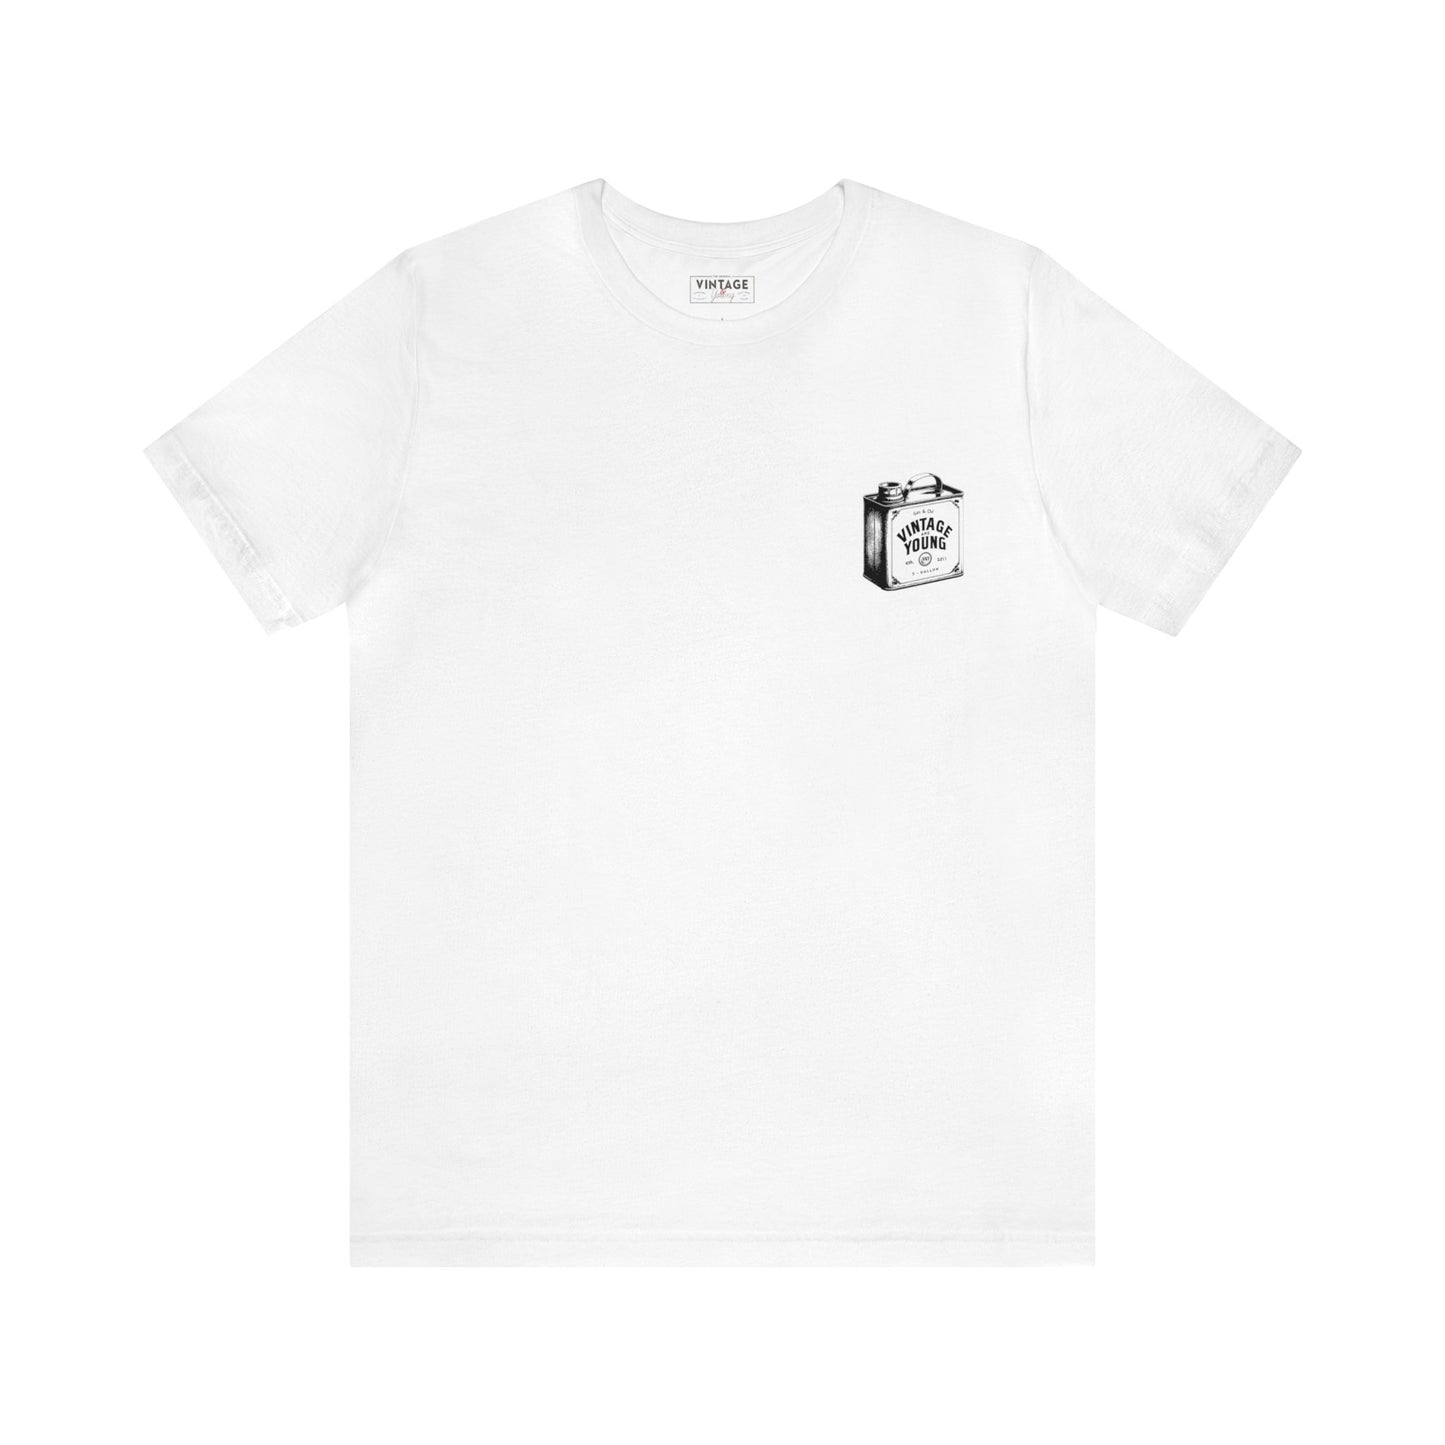 V&Y Oil Can Tee